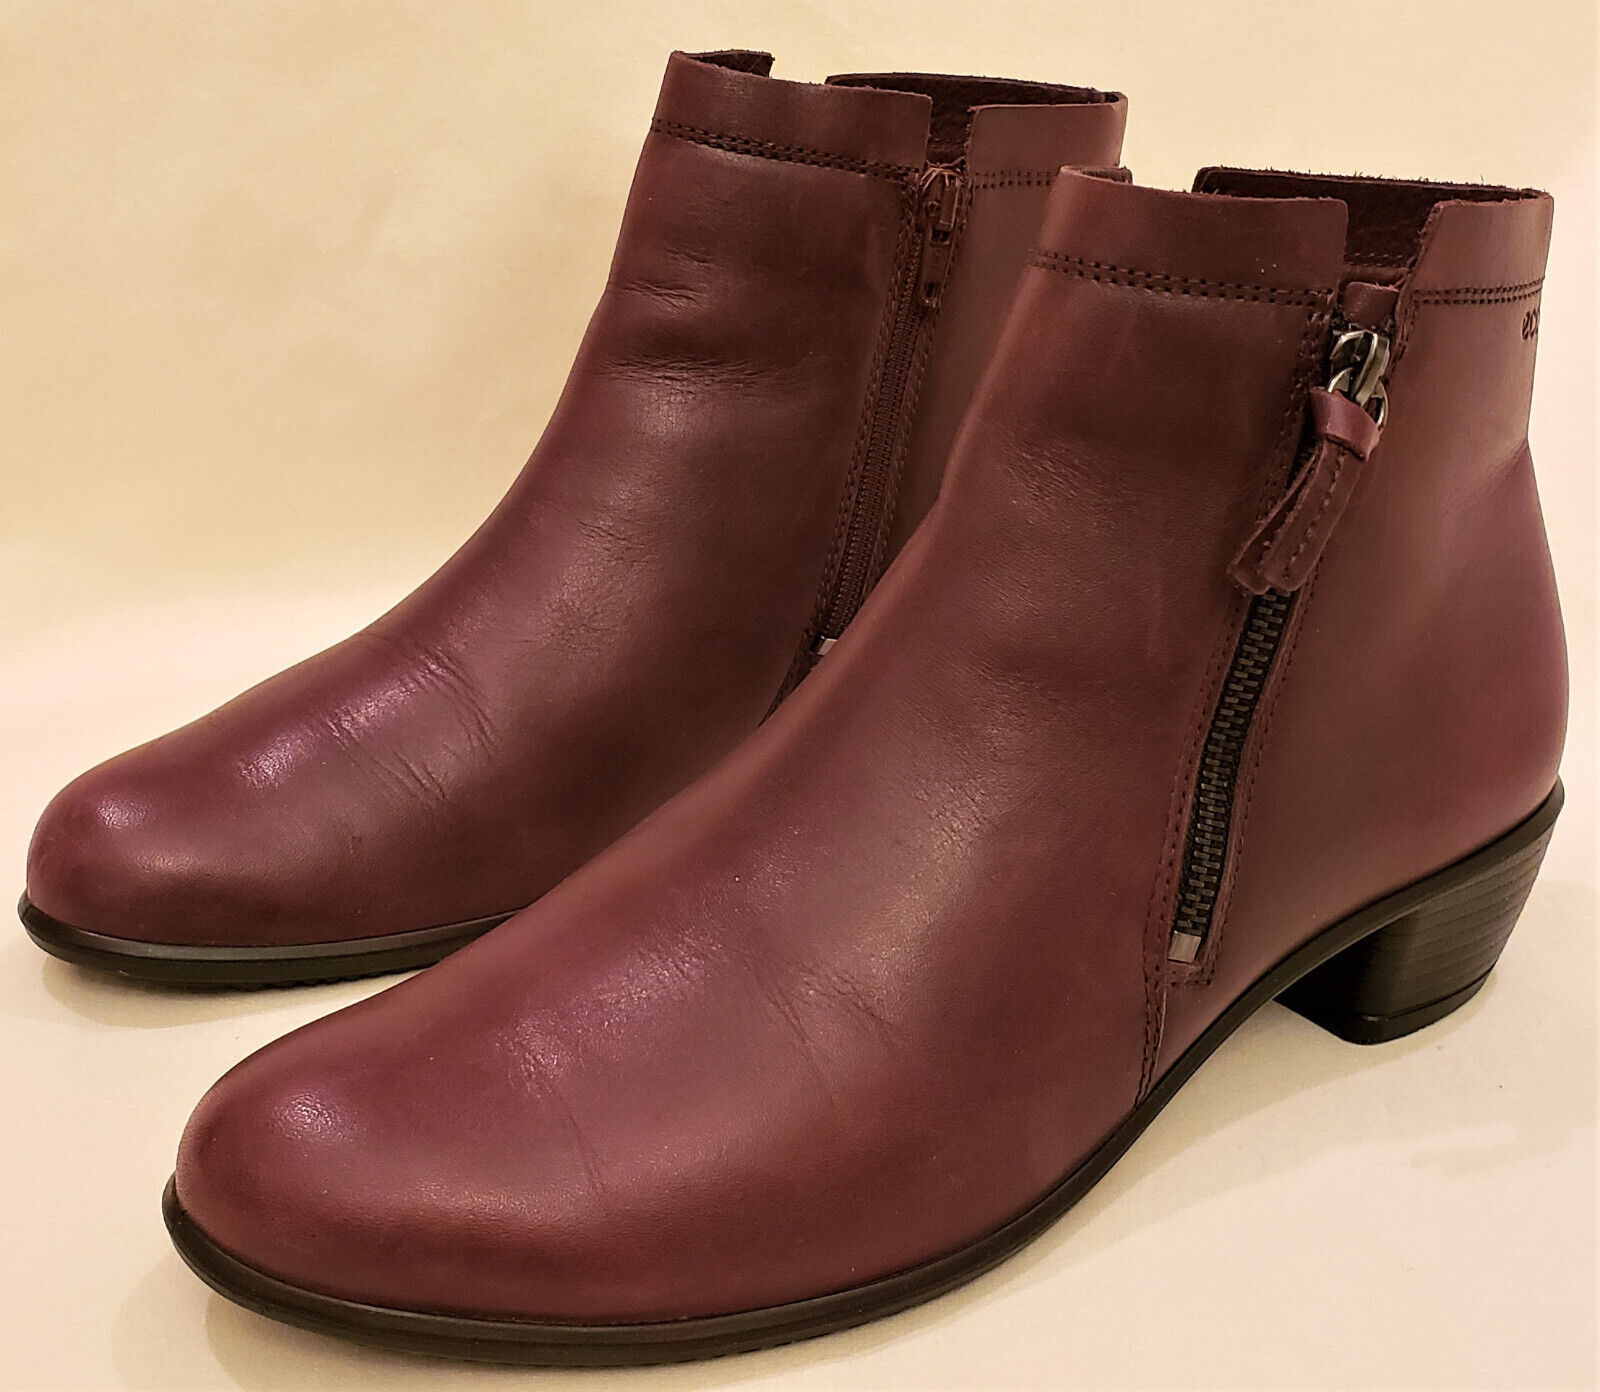 Primary image for ECCO Ankle Boots Size-Marked EU 41/US~10-10.5 Bordeaux Leather